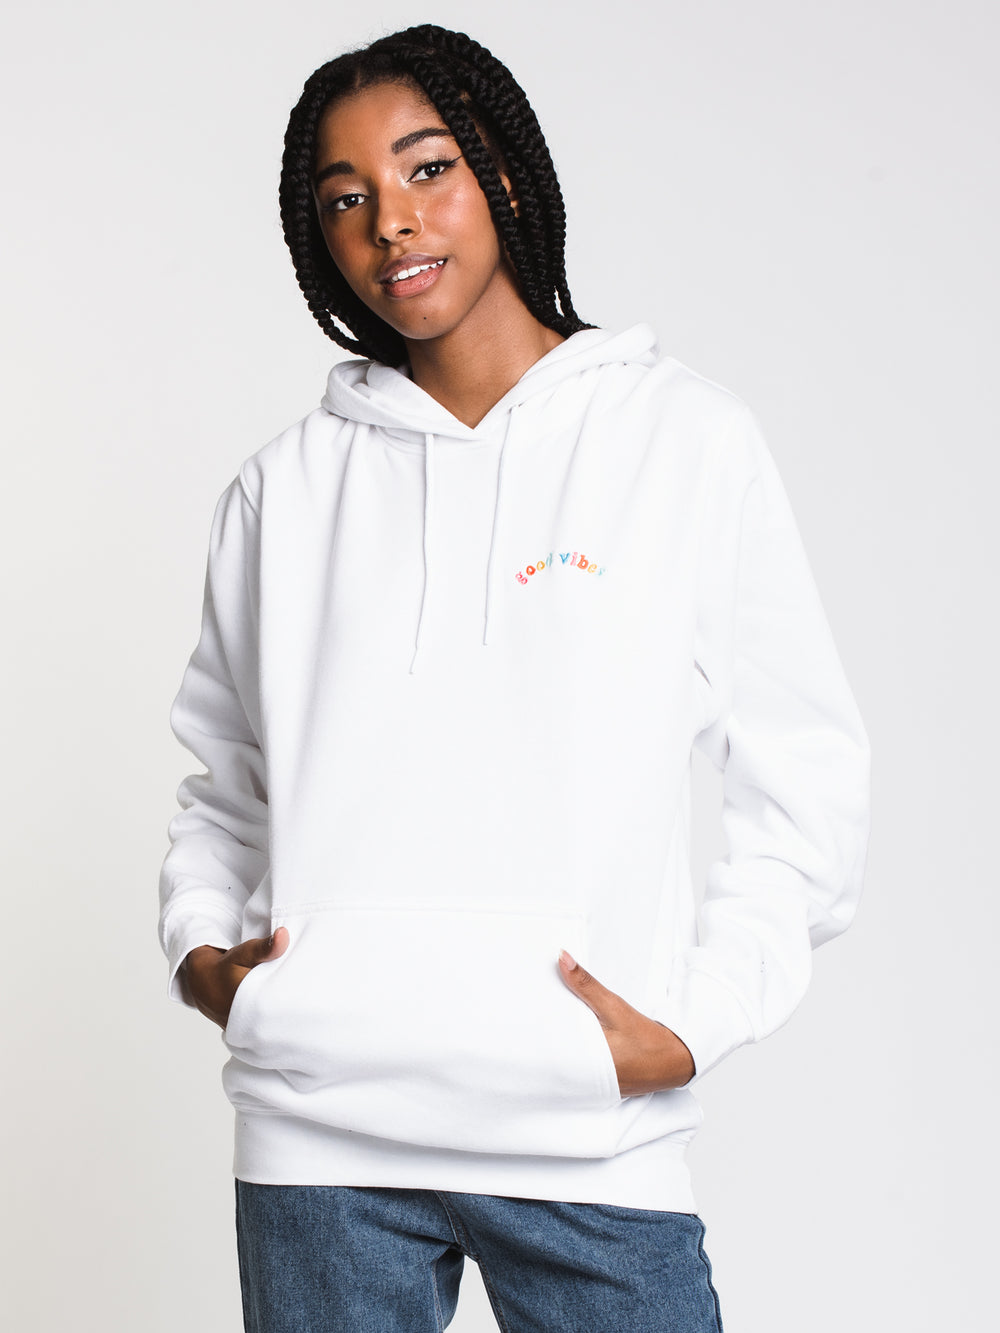 HOTLINE APPAREL UNISEX WOGOOD VIBES EMBROIDERED HOODIE - WHT - CLEARANCE